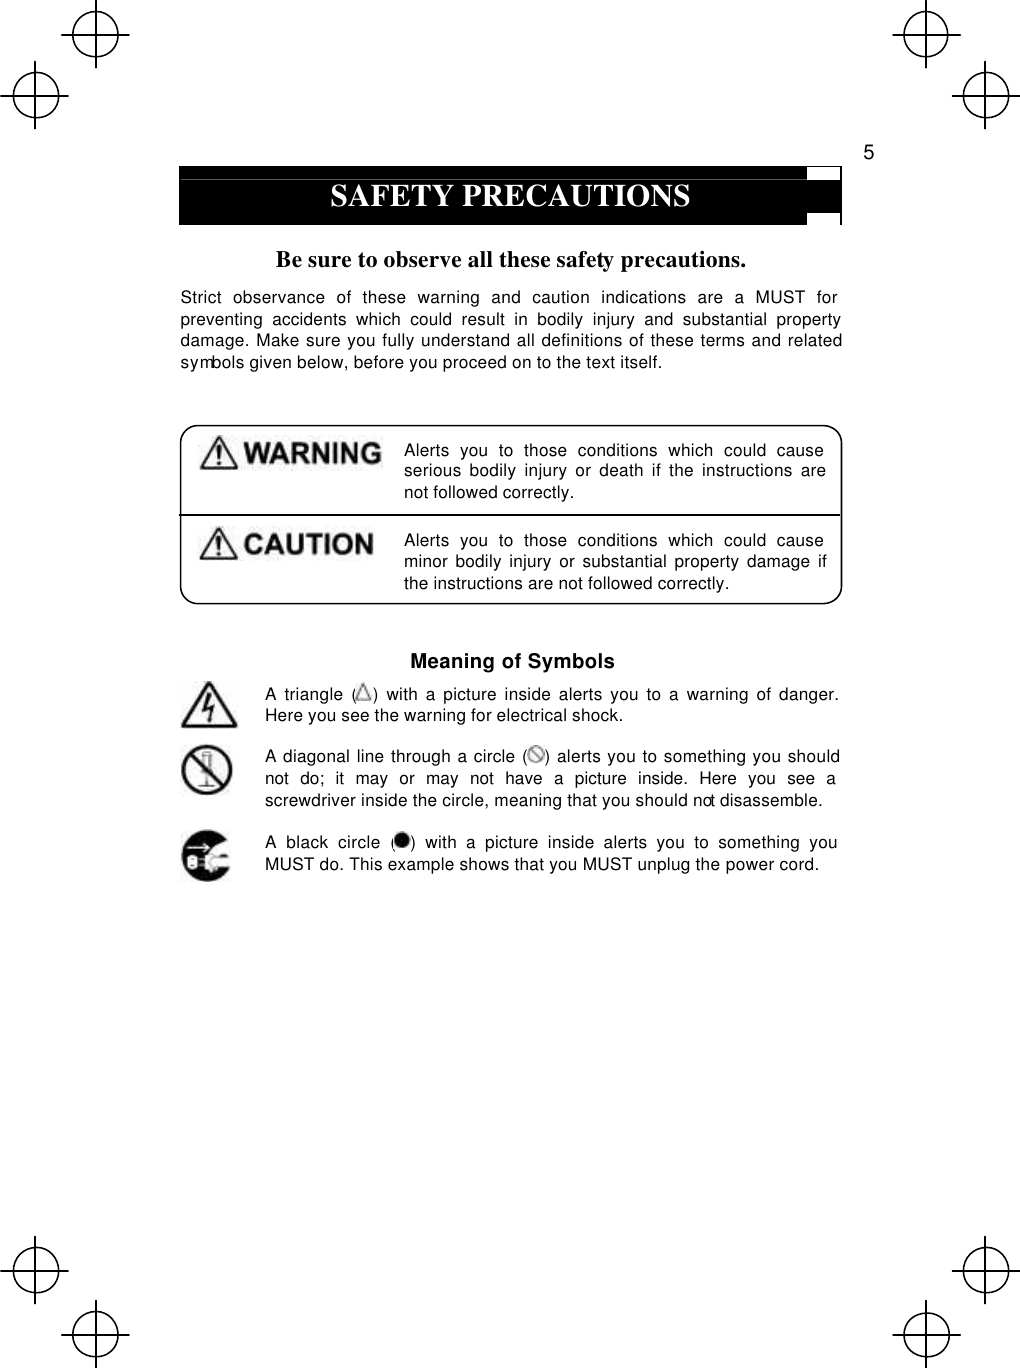   5  SAFETY PRECAUTIONS  Be sure to observe all these safety precautions. Strict observance of these warning and caution indications are a MUST for preventing accidents which could result in bodily injury and substantial property damage. Make sure you fully understand all definitions of these terms and related symbols given below, before you proceed on to the text itself.   Alerts you to those conditions which could cause serious bodily injury or death if the instructions are not followed correctly.  Alerts you to those conditions which could cause minor bodily injury or substantial property damage if the instructions are not followed correctly.  Meaning of Symbols  A triangle () with a picture inside alerts you to a warning of danger. Here you see the warning for electrical shock.    A diagonal line through a circle () alerts you to something you should not do; it may or may not have a picture inside. Here you see a screwdriver inside the circle, meaning that you should not disassemble.  A black circle () with a picture inside alerts you to something you MUST do. This example shows that you MUST unplug the power cord.   